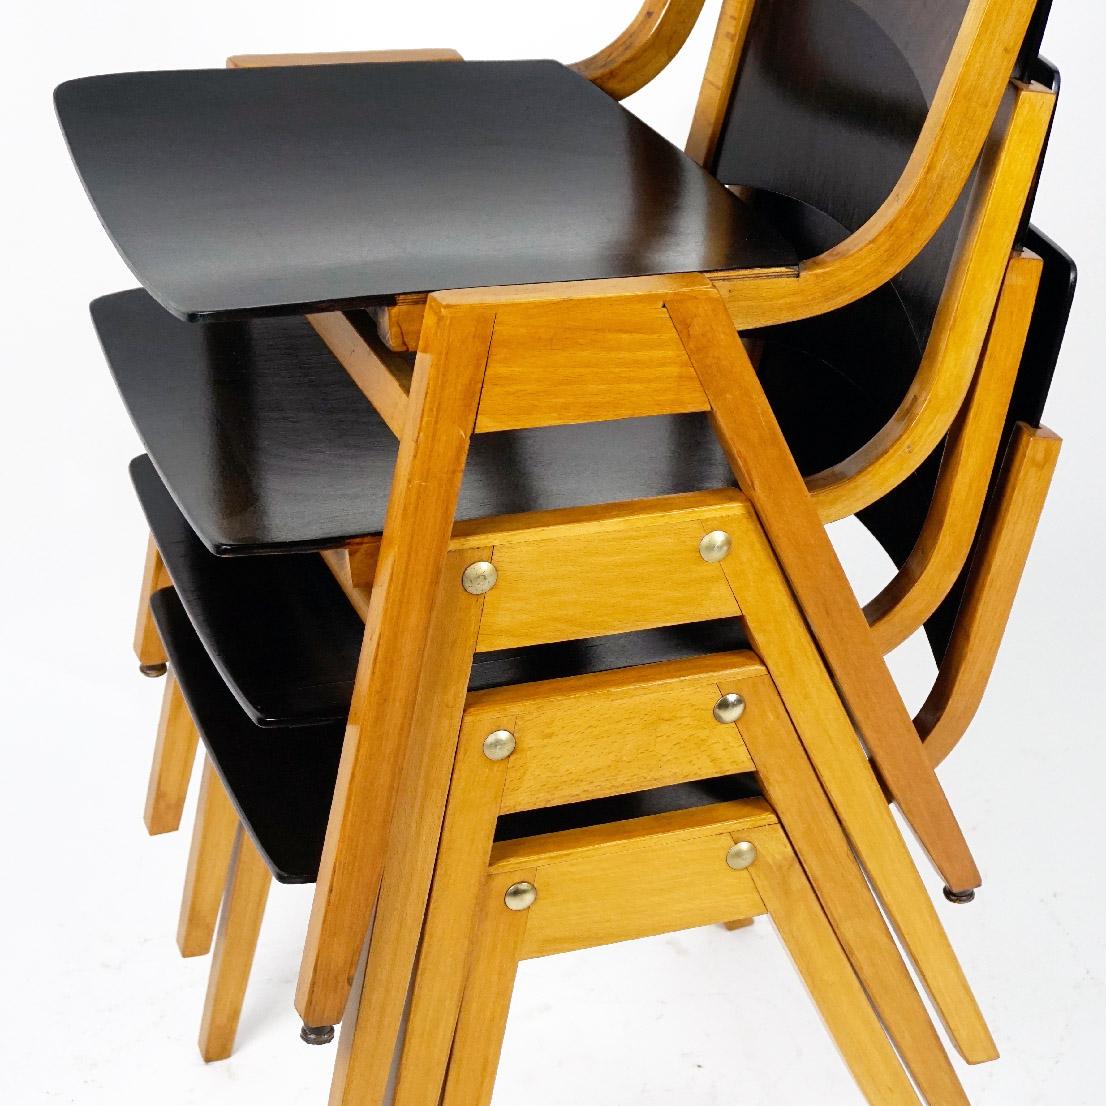 Austrian midcentury beechwood stacking chairs designed by Roland Rainer in 1952, same time as the famous model called Stadthallenstuhl. The model P7 has been also used at the Vienna Stadthalle, mostly in the backstage areas. One of the most